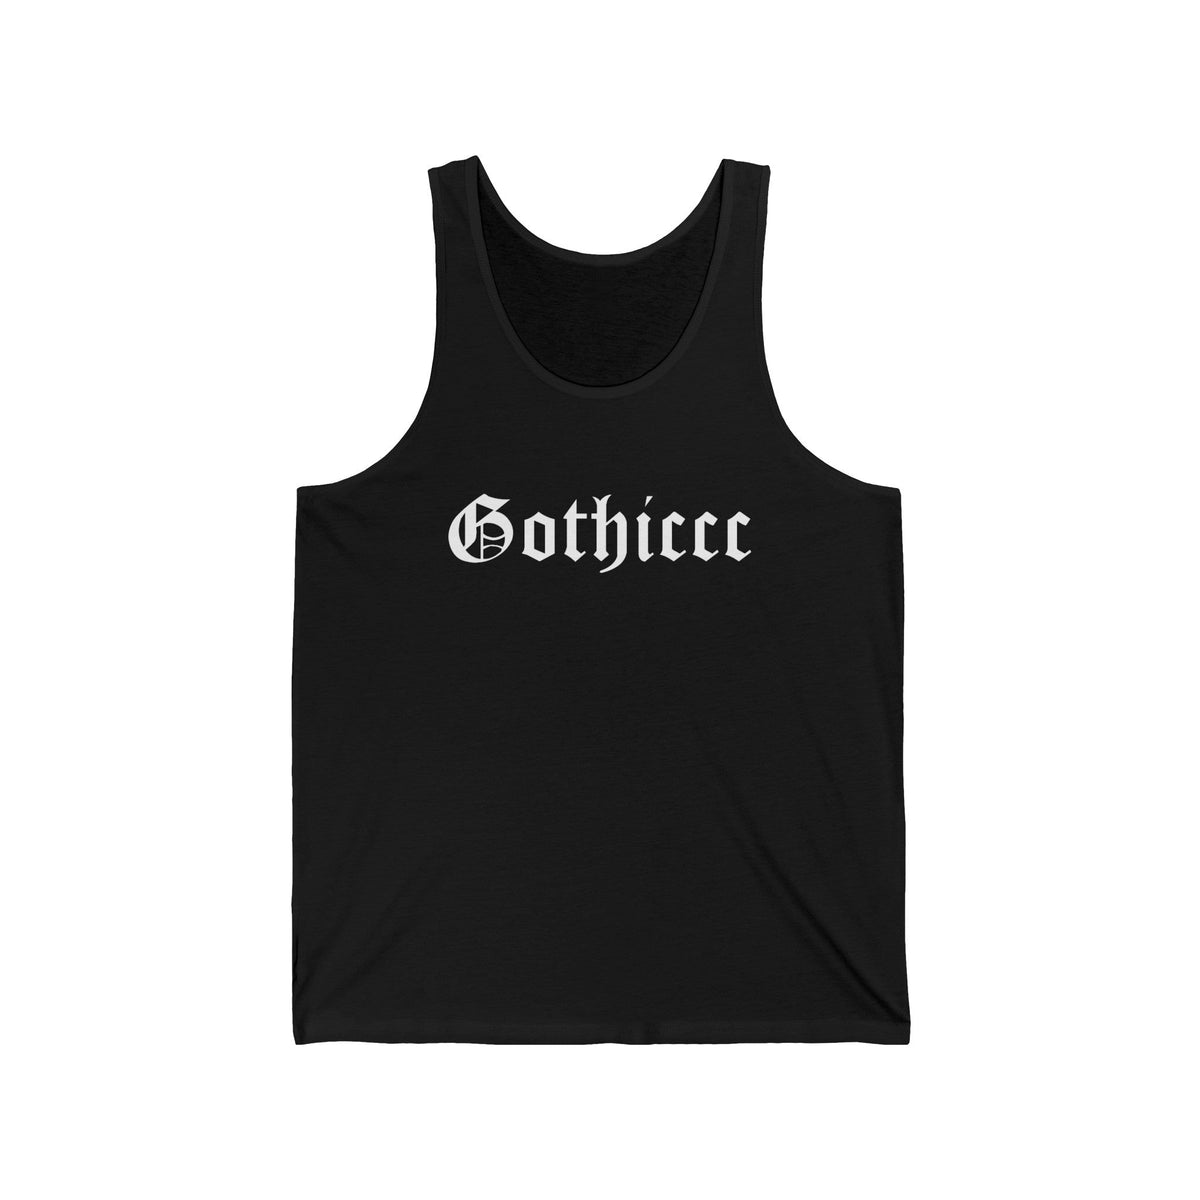 Gothiccc Unisex Jersey Tank - Goth Cloth Co.Tank Top53902594963134011198